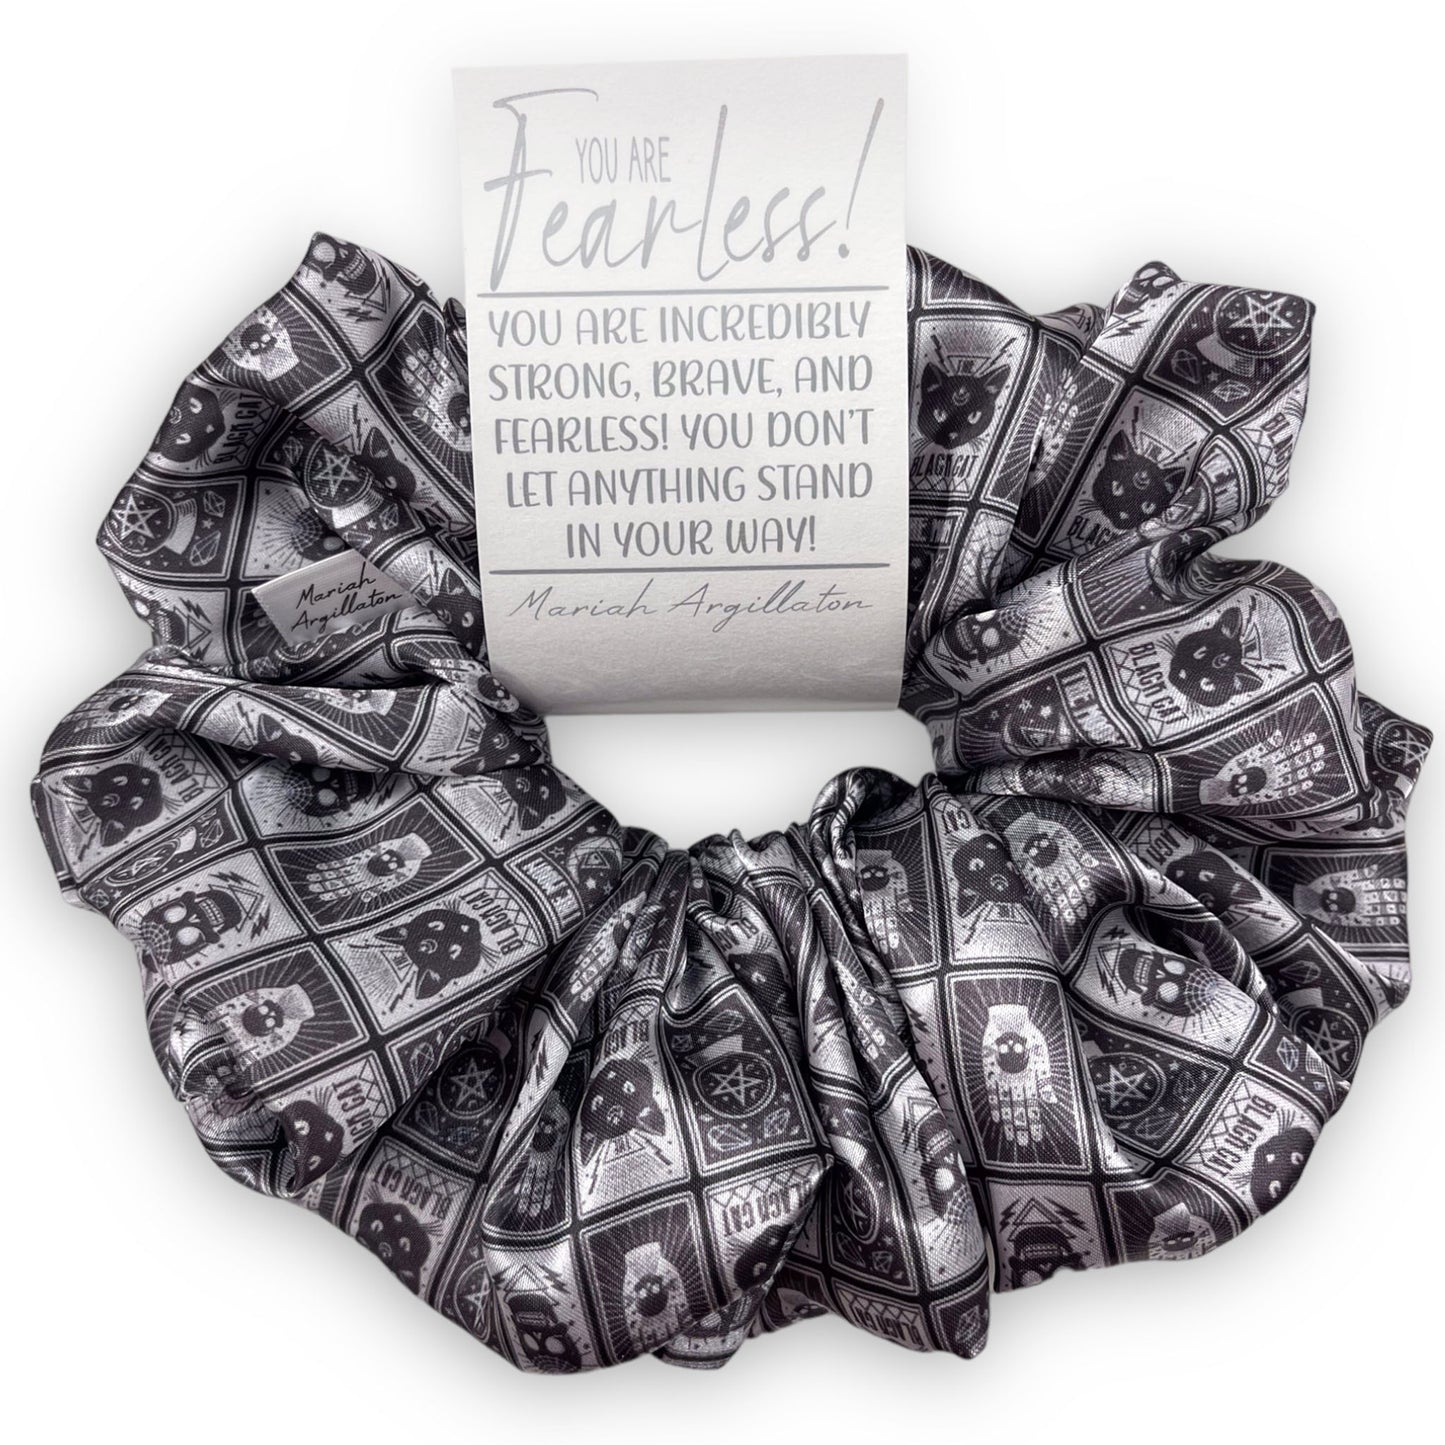 You Are Fearless! XL Scrunchie!